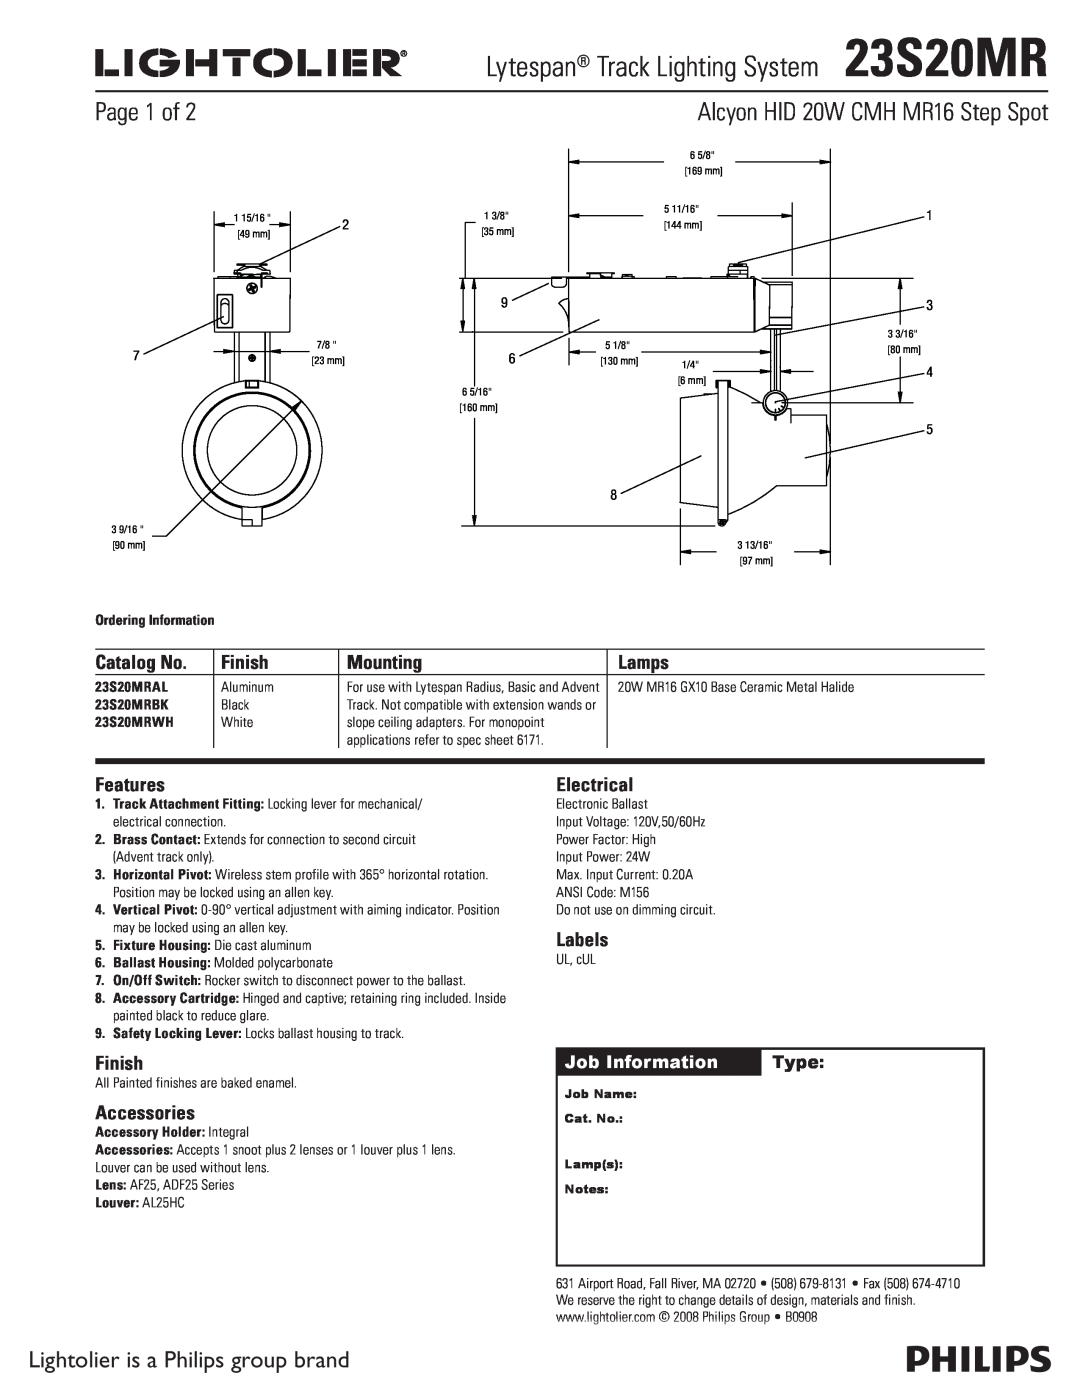 Lightolier 23S20MR manual Page 1 of, Lightolier is a Philips group brand, Catalog No, Finish, Mounting, Lamps, Features 